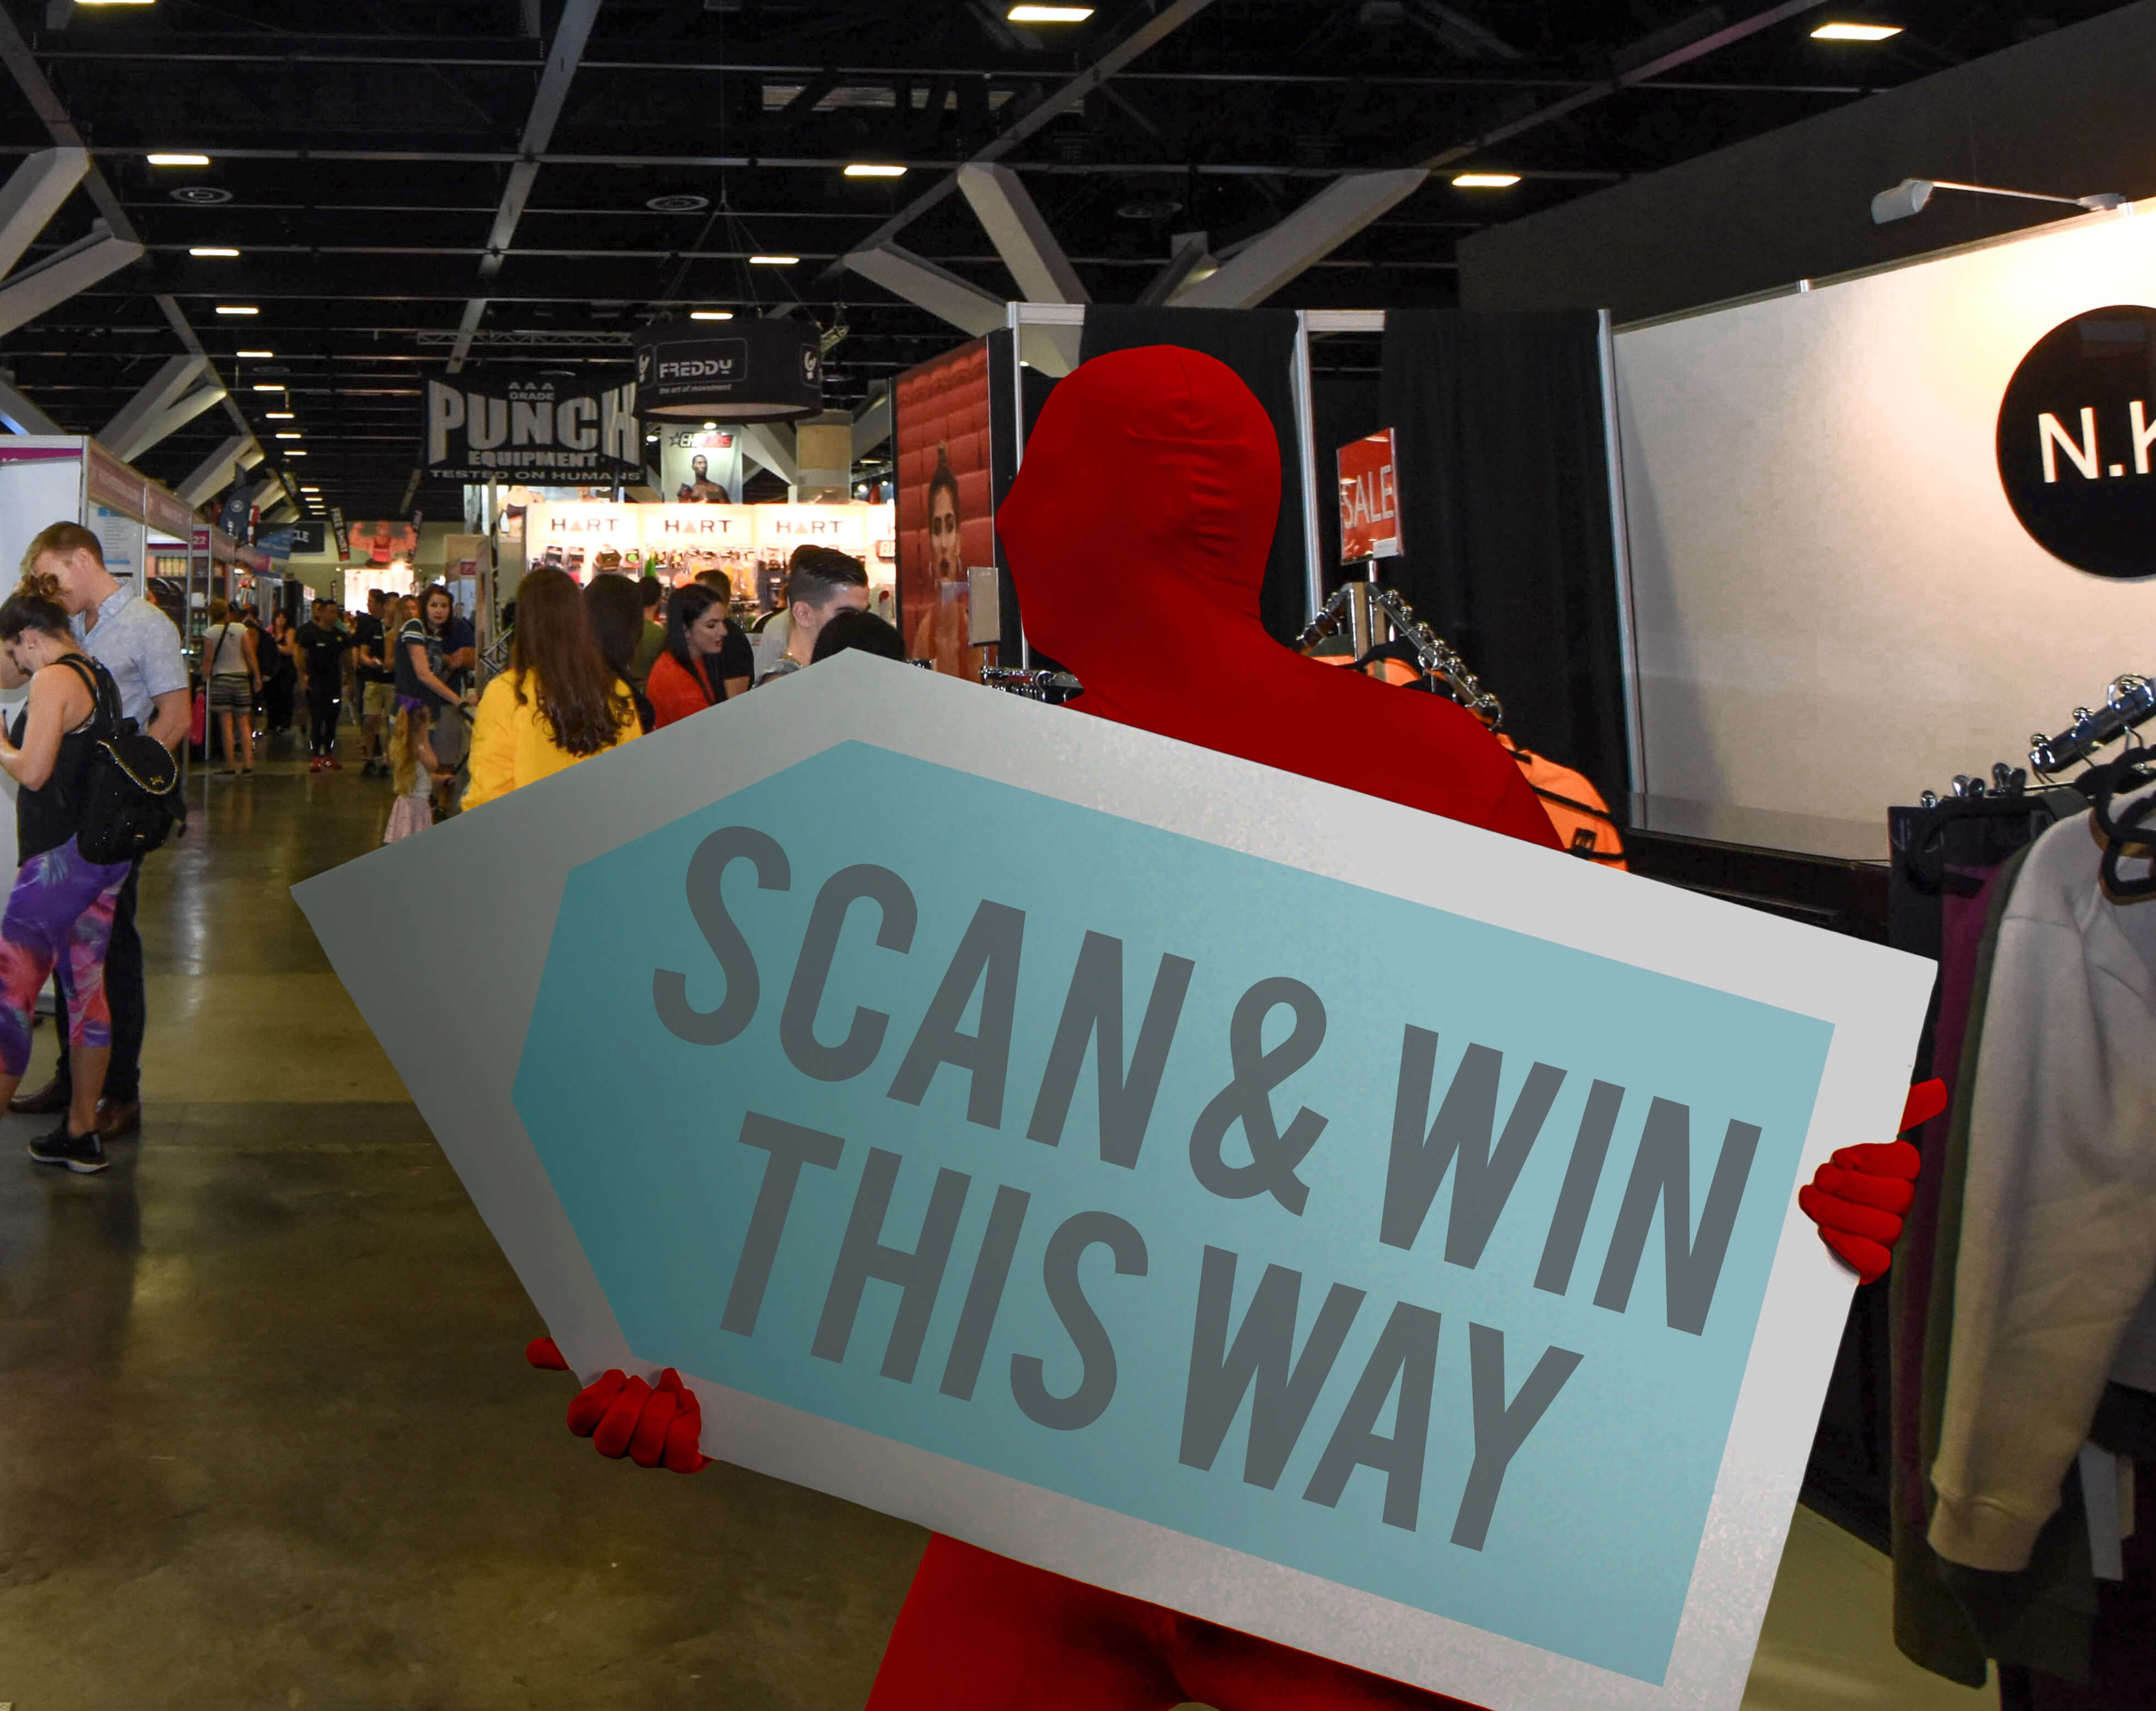 A sign waver holding a large arrow sign while wearing a bright red morph suit during an event